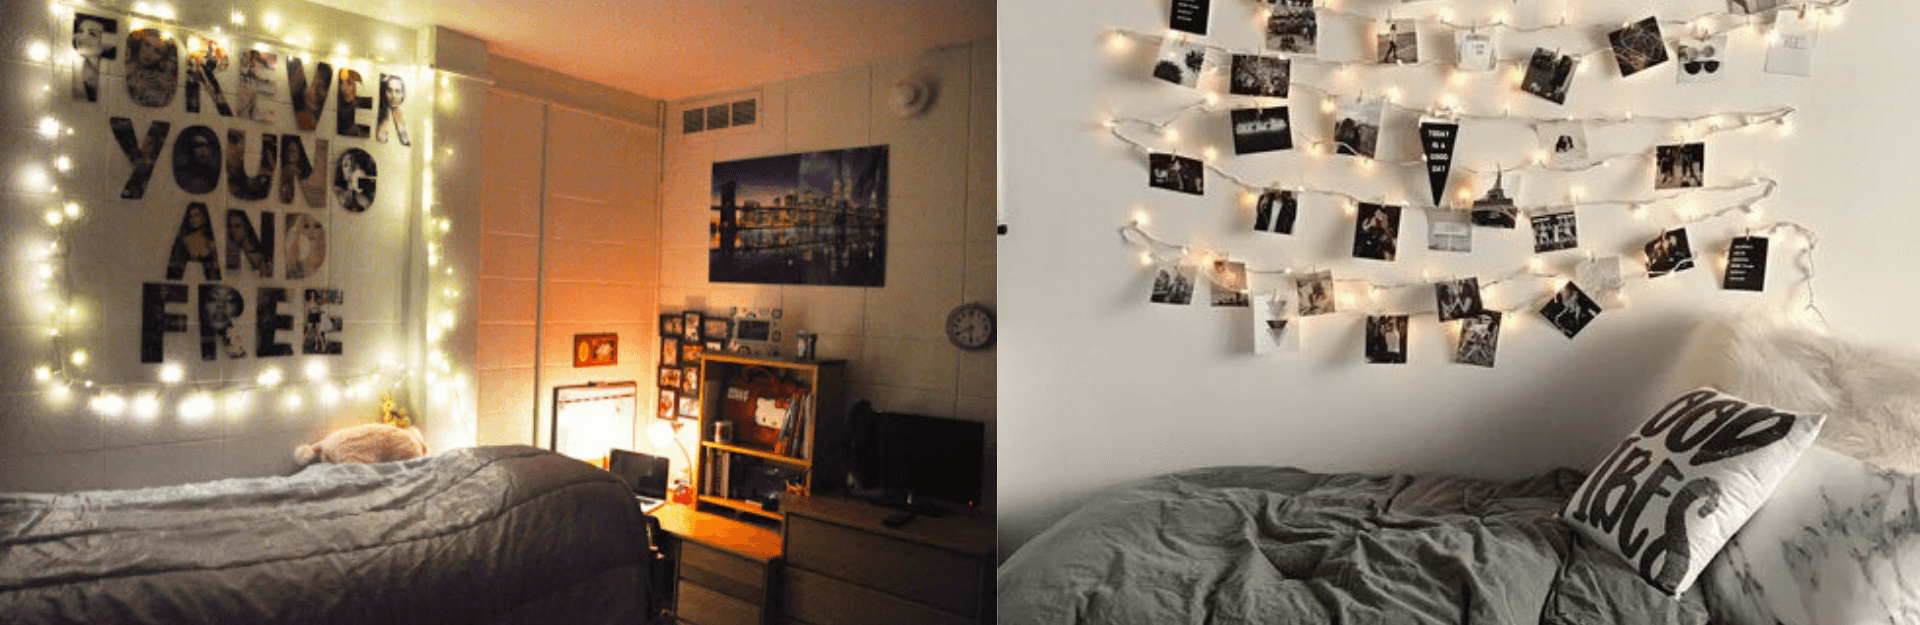 Room Décor Tips for Students on a Budget | University Living